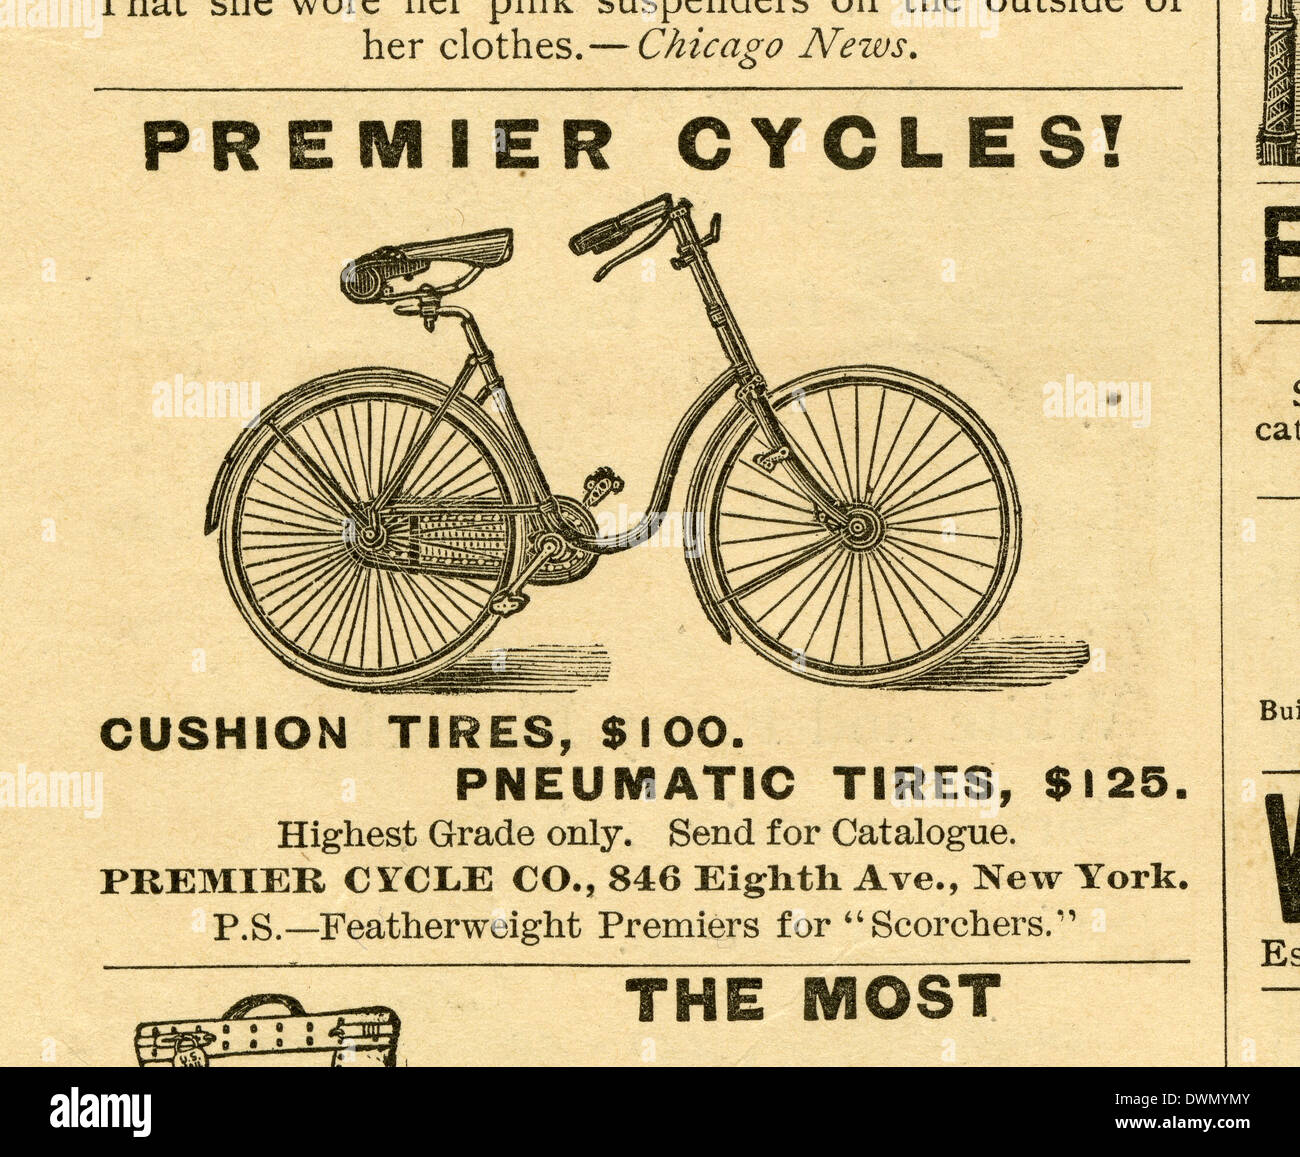 1892 advertisement, Premier Cycle Company of New York. Stock Photo